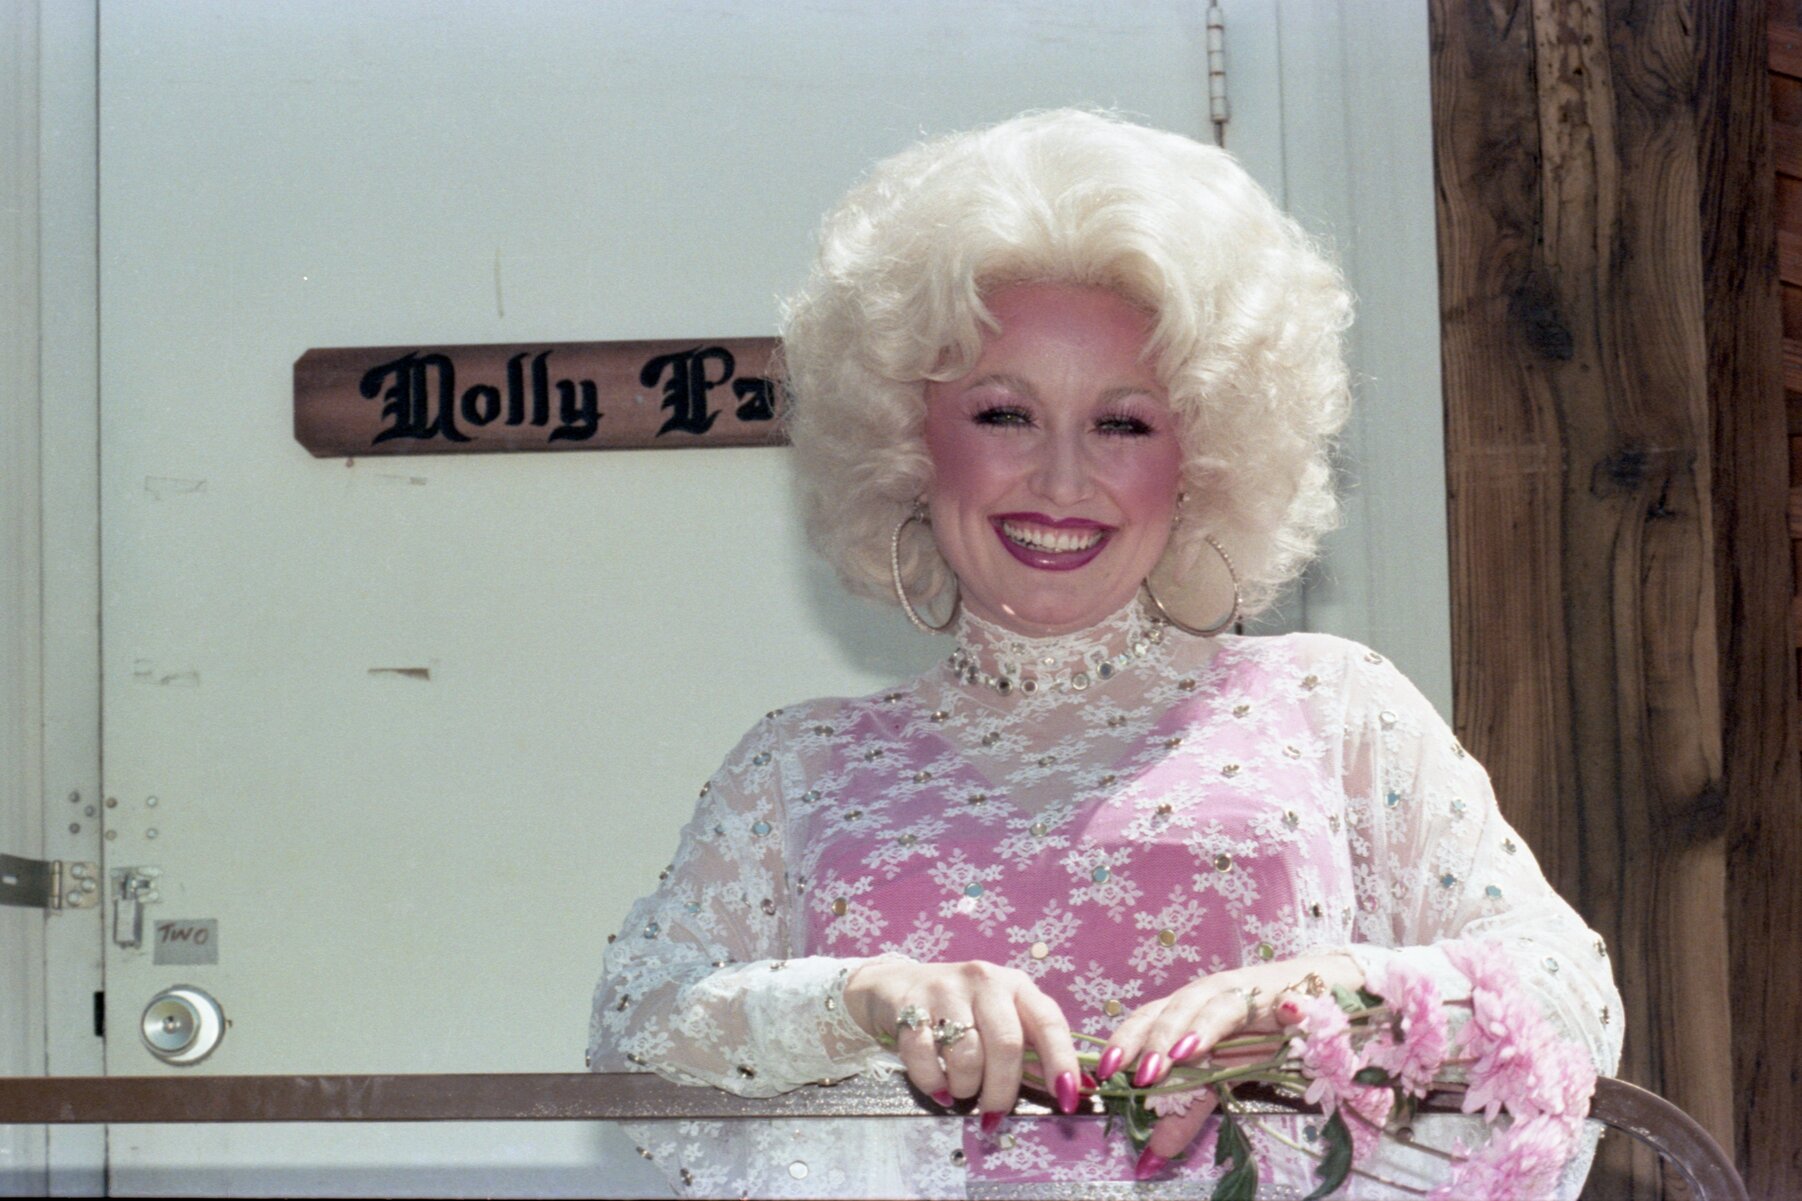 Dolly Parton poses backstage at a concert in 1978. She has big, blond curly hair and is wearing a pink and white blouse. She's smiling right into the camera.